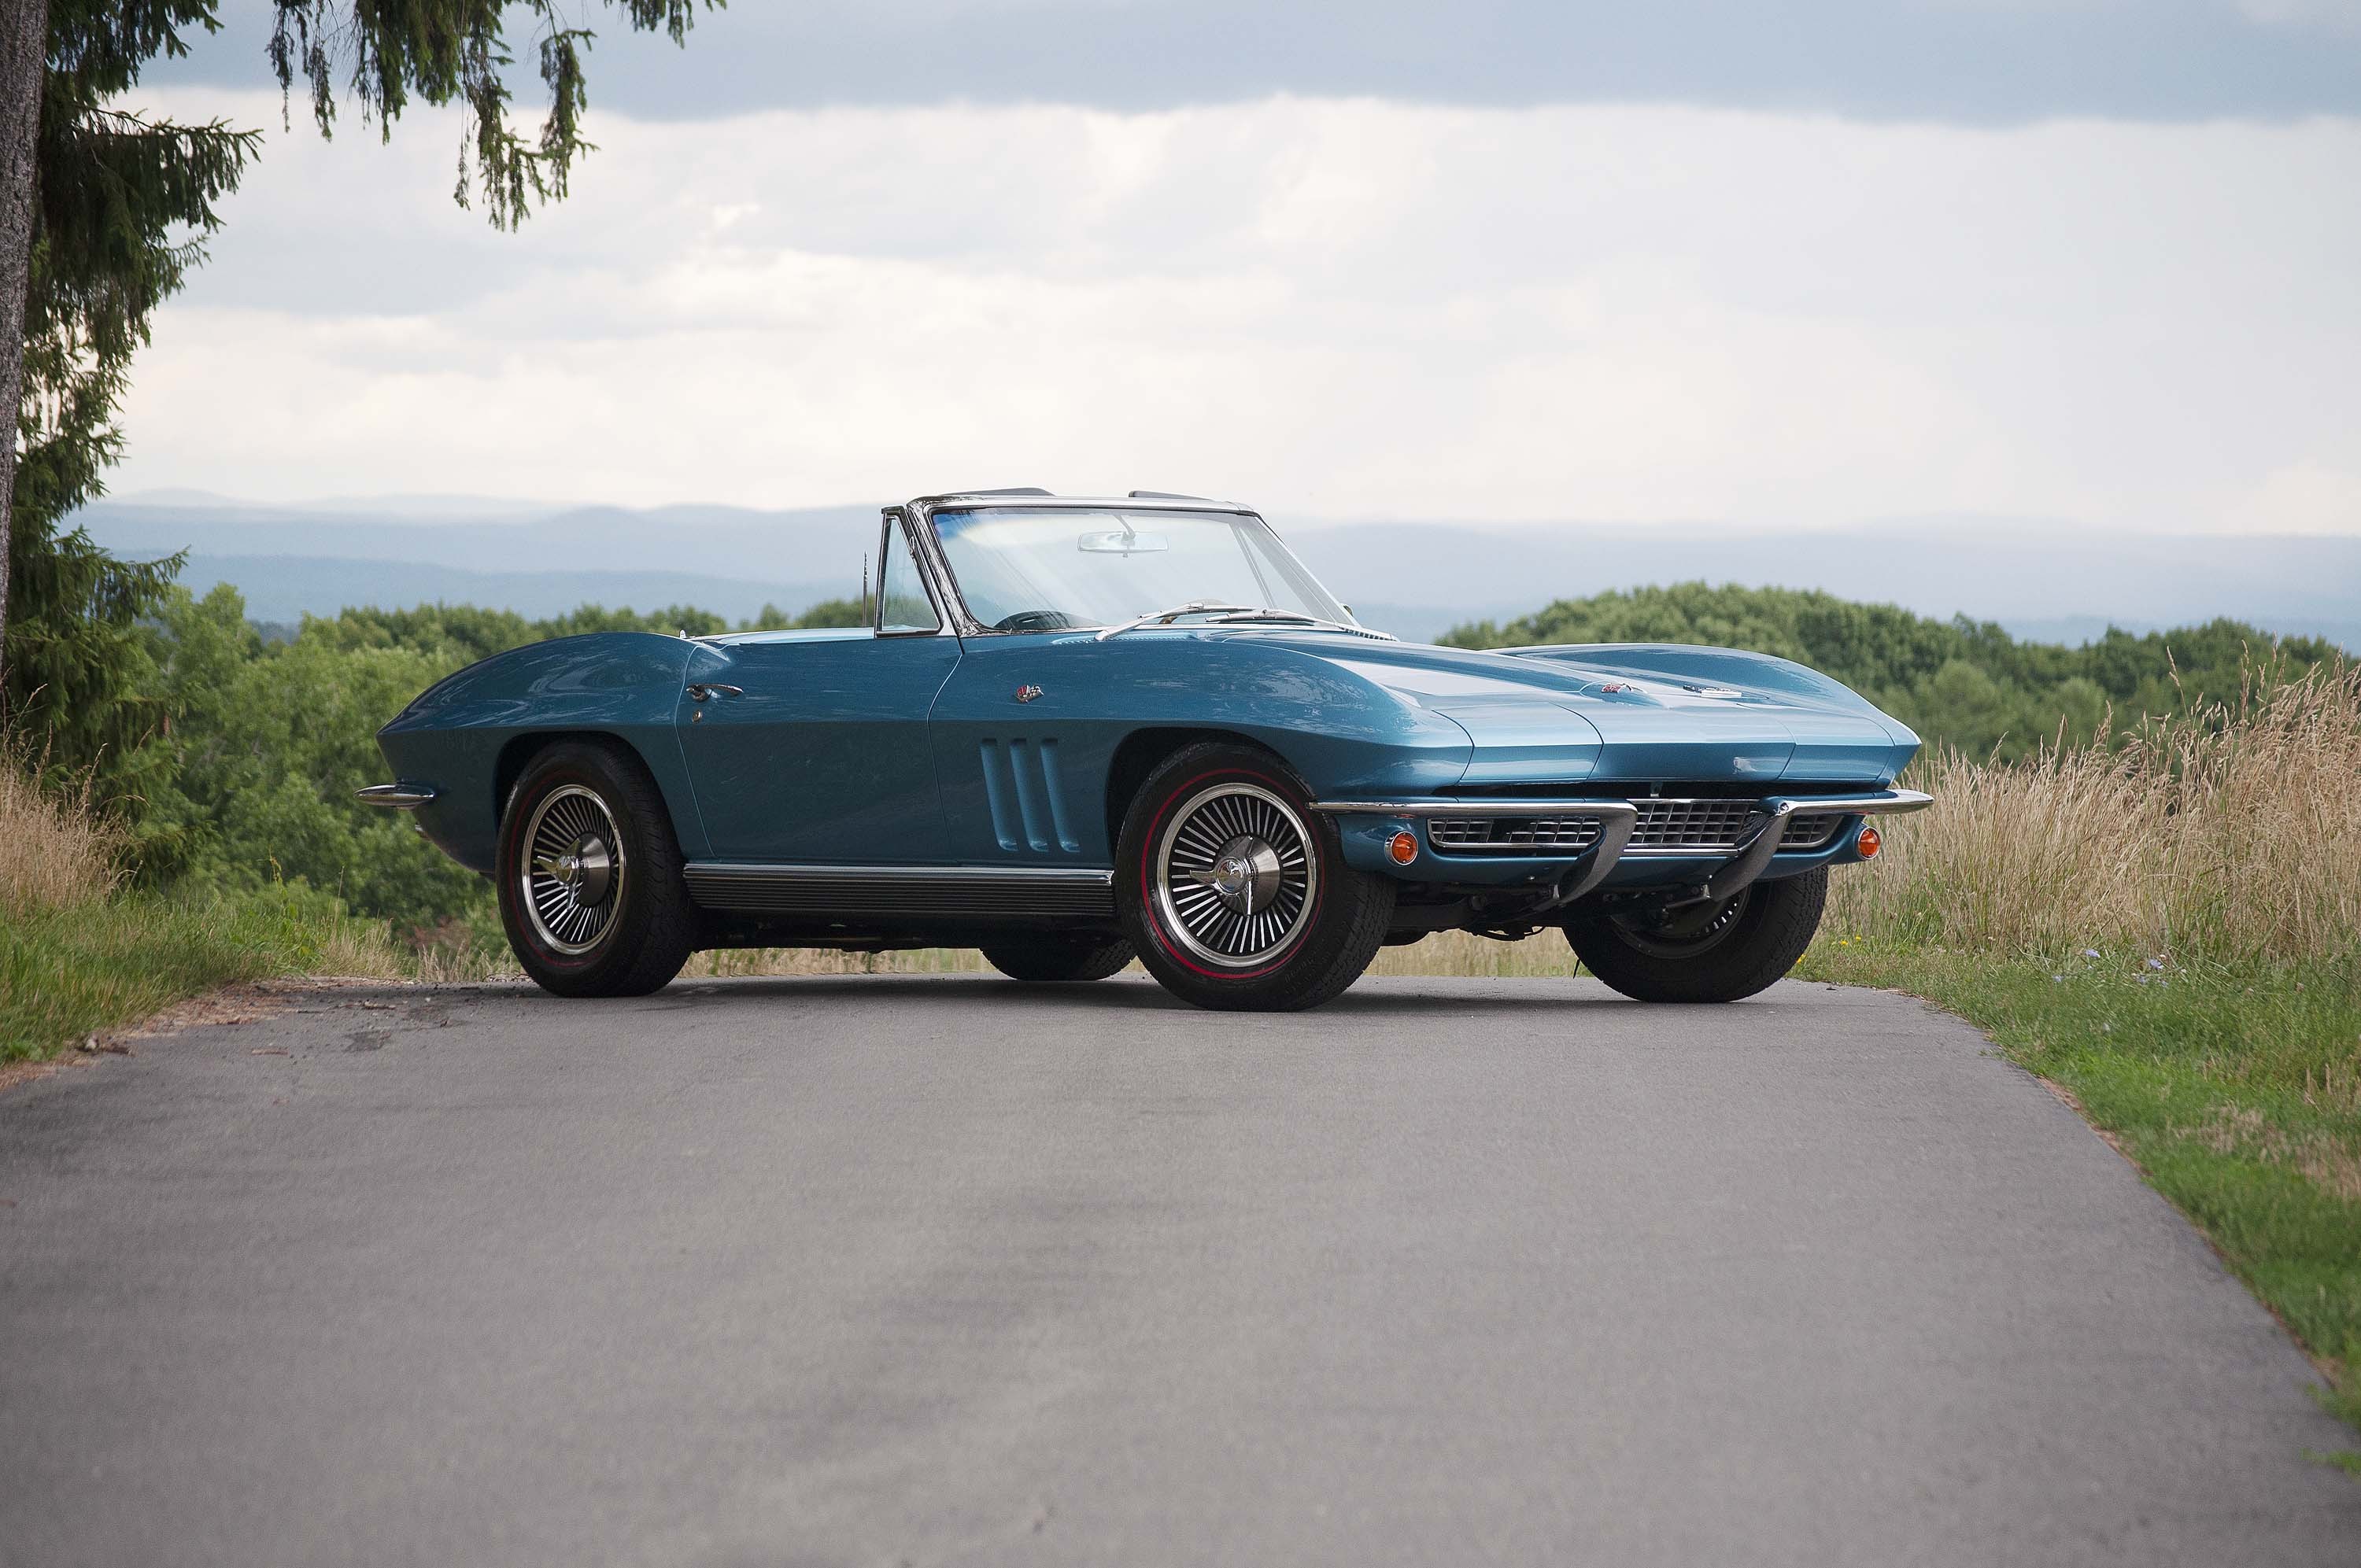 What To Look For When Buying A 1963-'67 Chevrolet Corvette